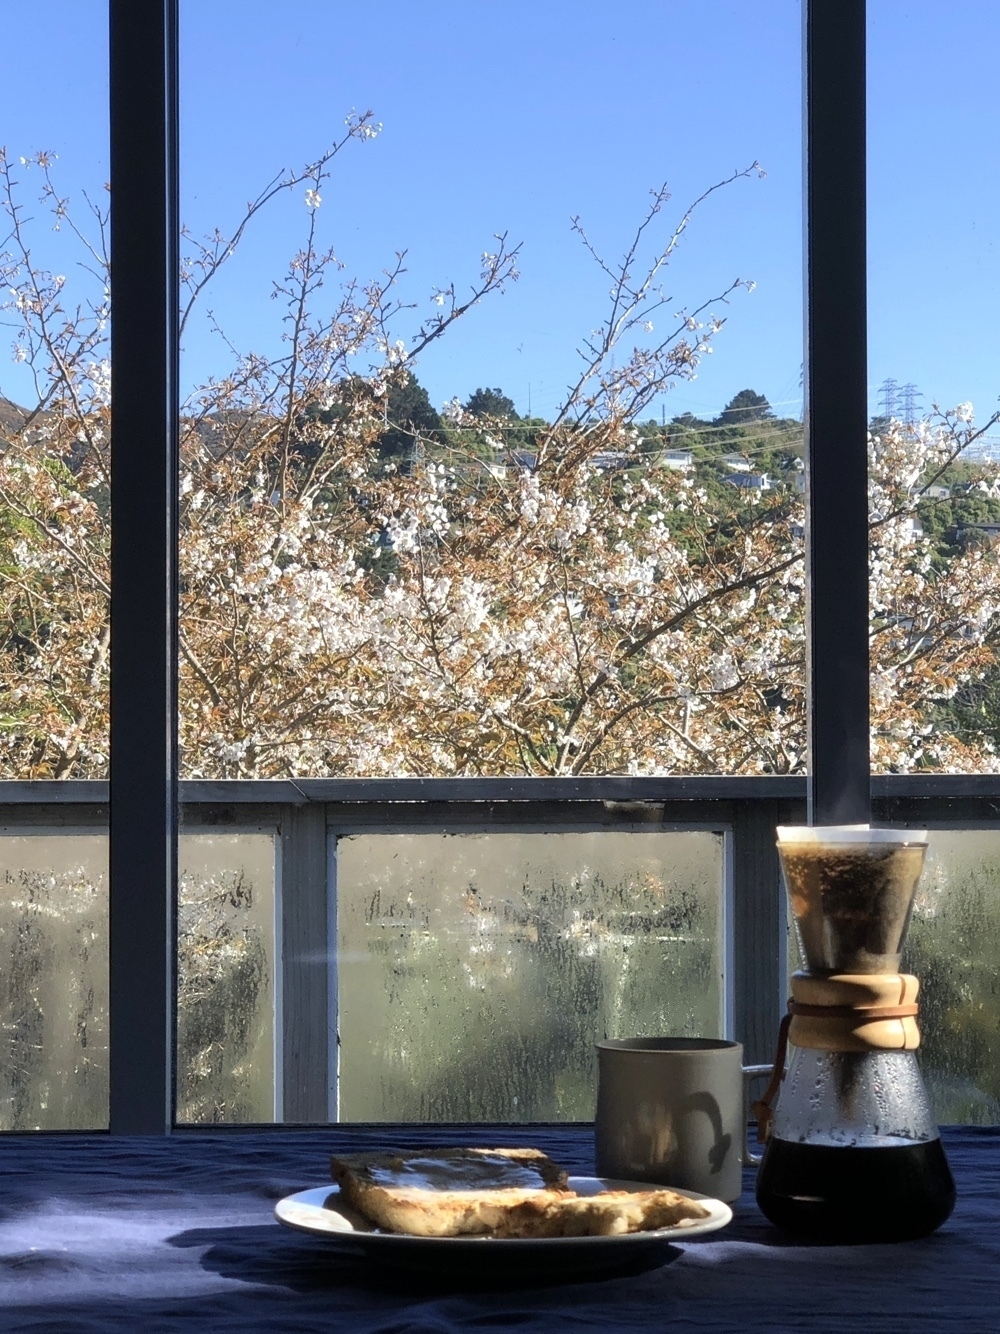 breakfast - toast and coffee looking out a window into sunshine with a cherry tree